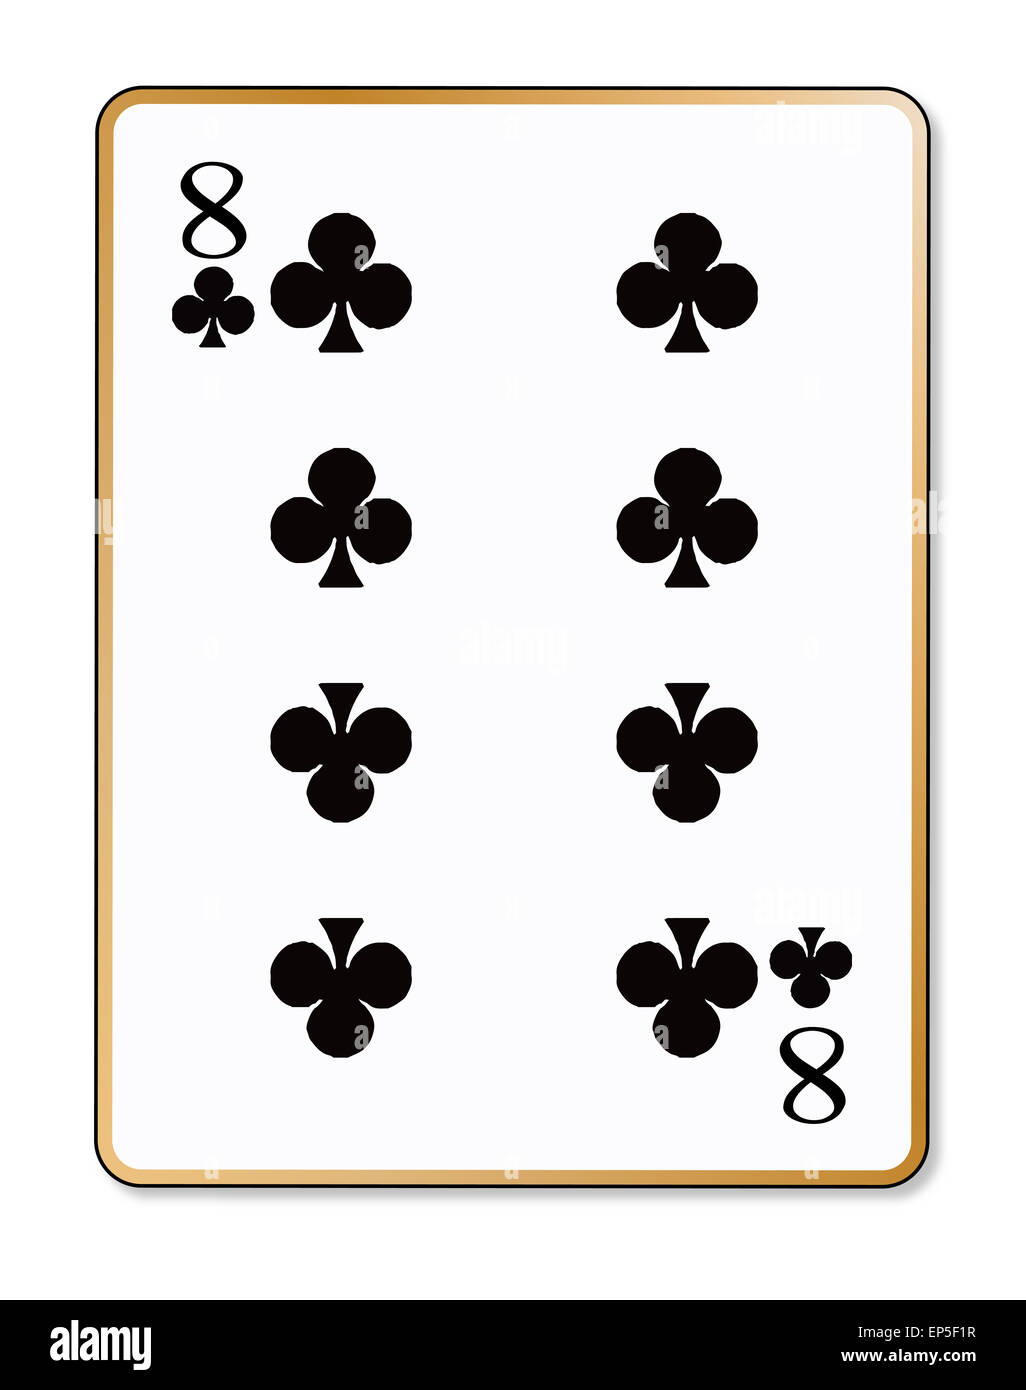 The playing card the Eight of clubs over a white background Stock Photo